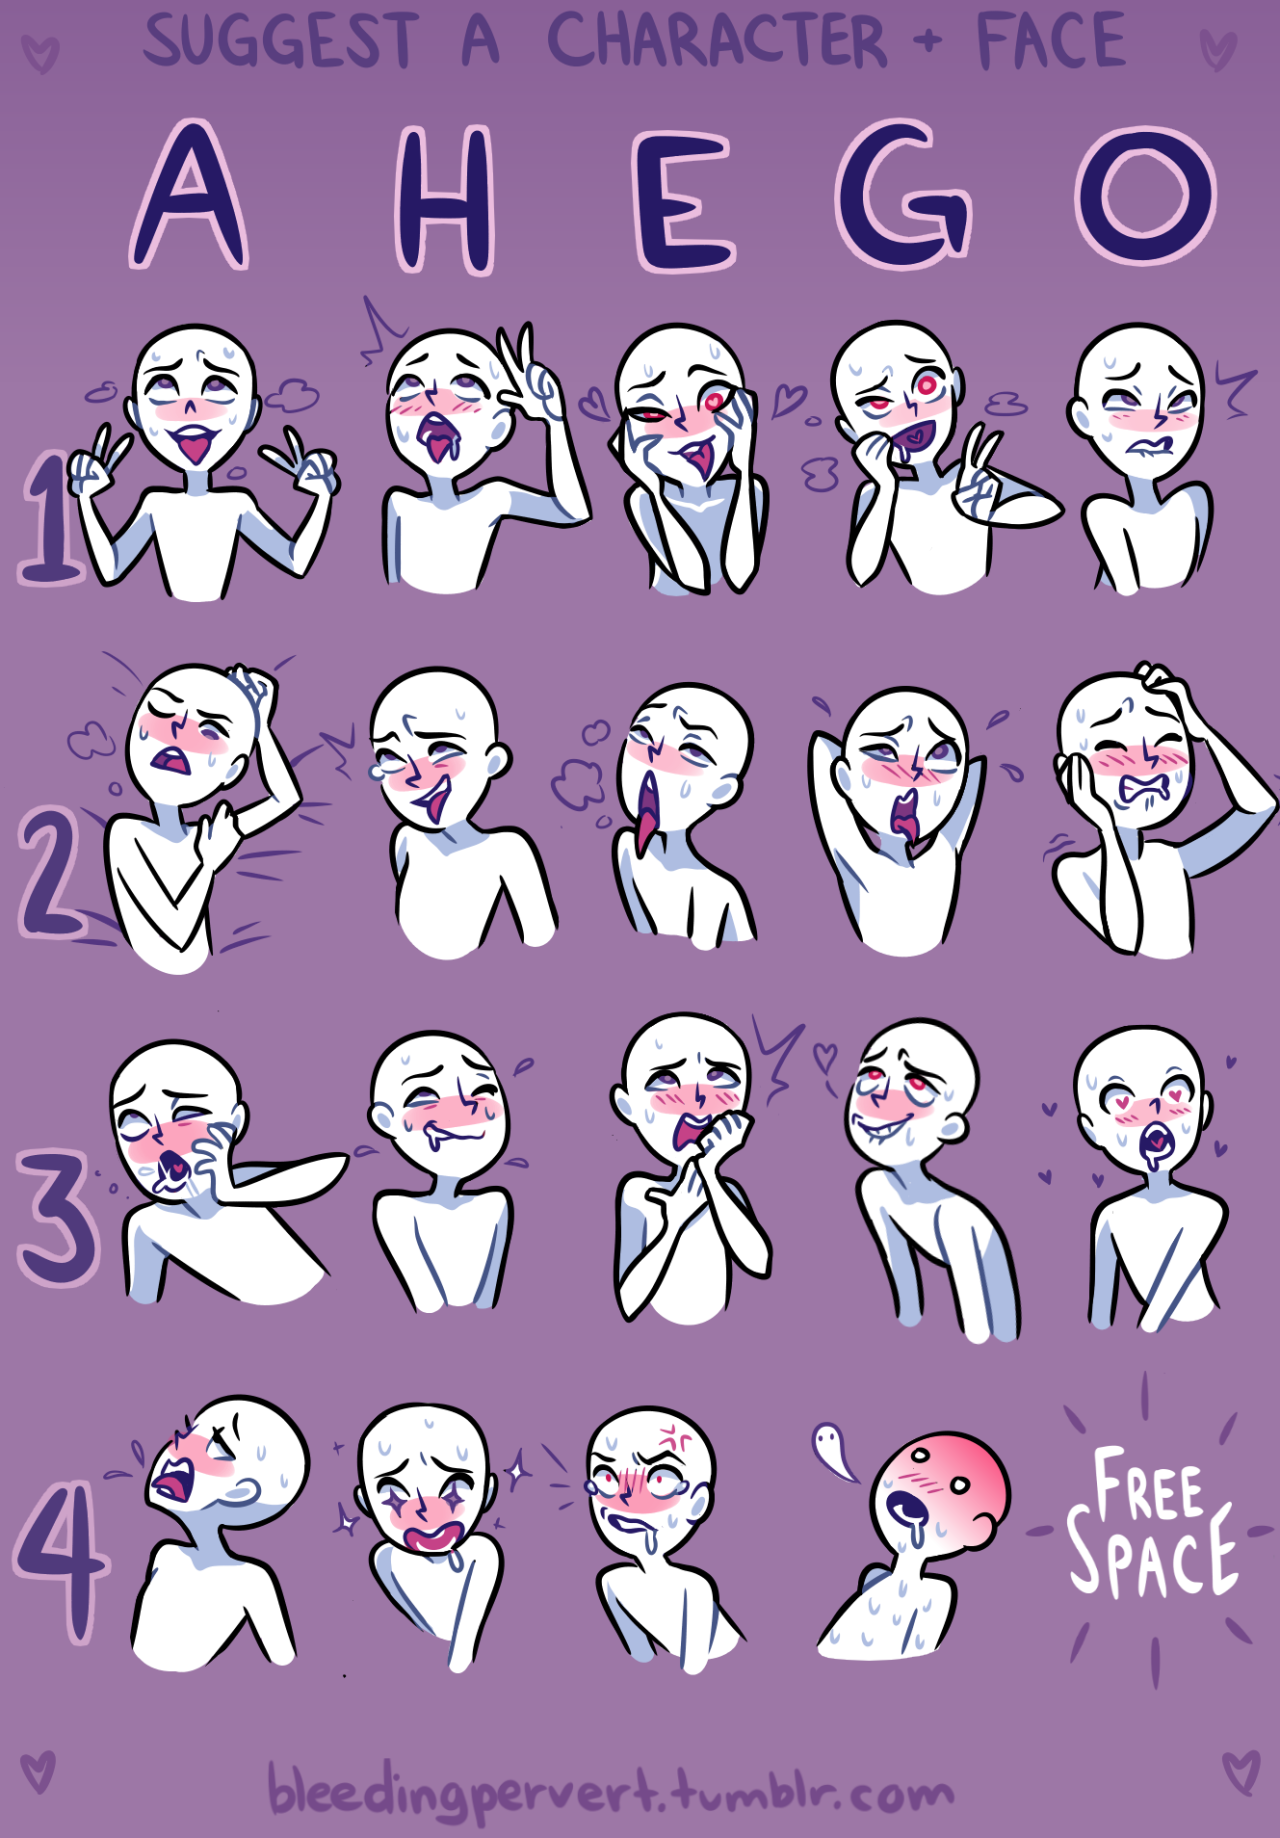 Ahegao reference chart, which is your favorite? [Bleeding Pervert]